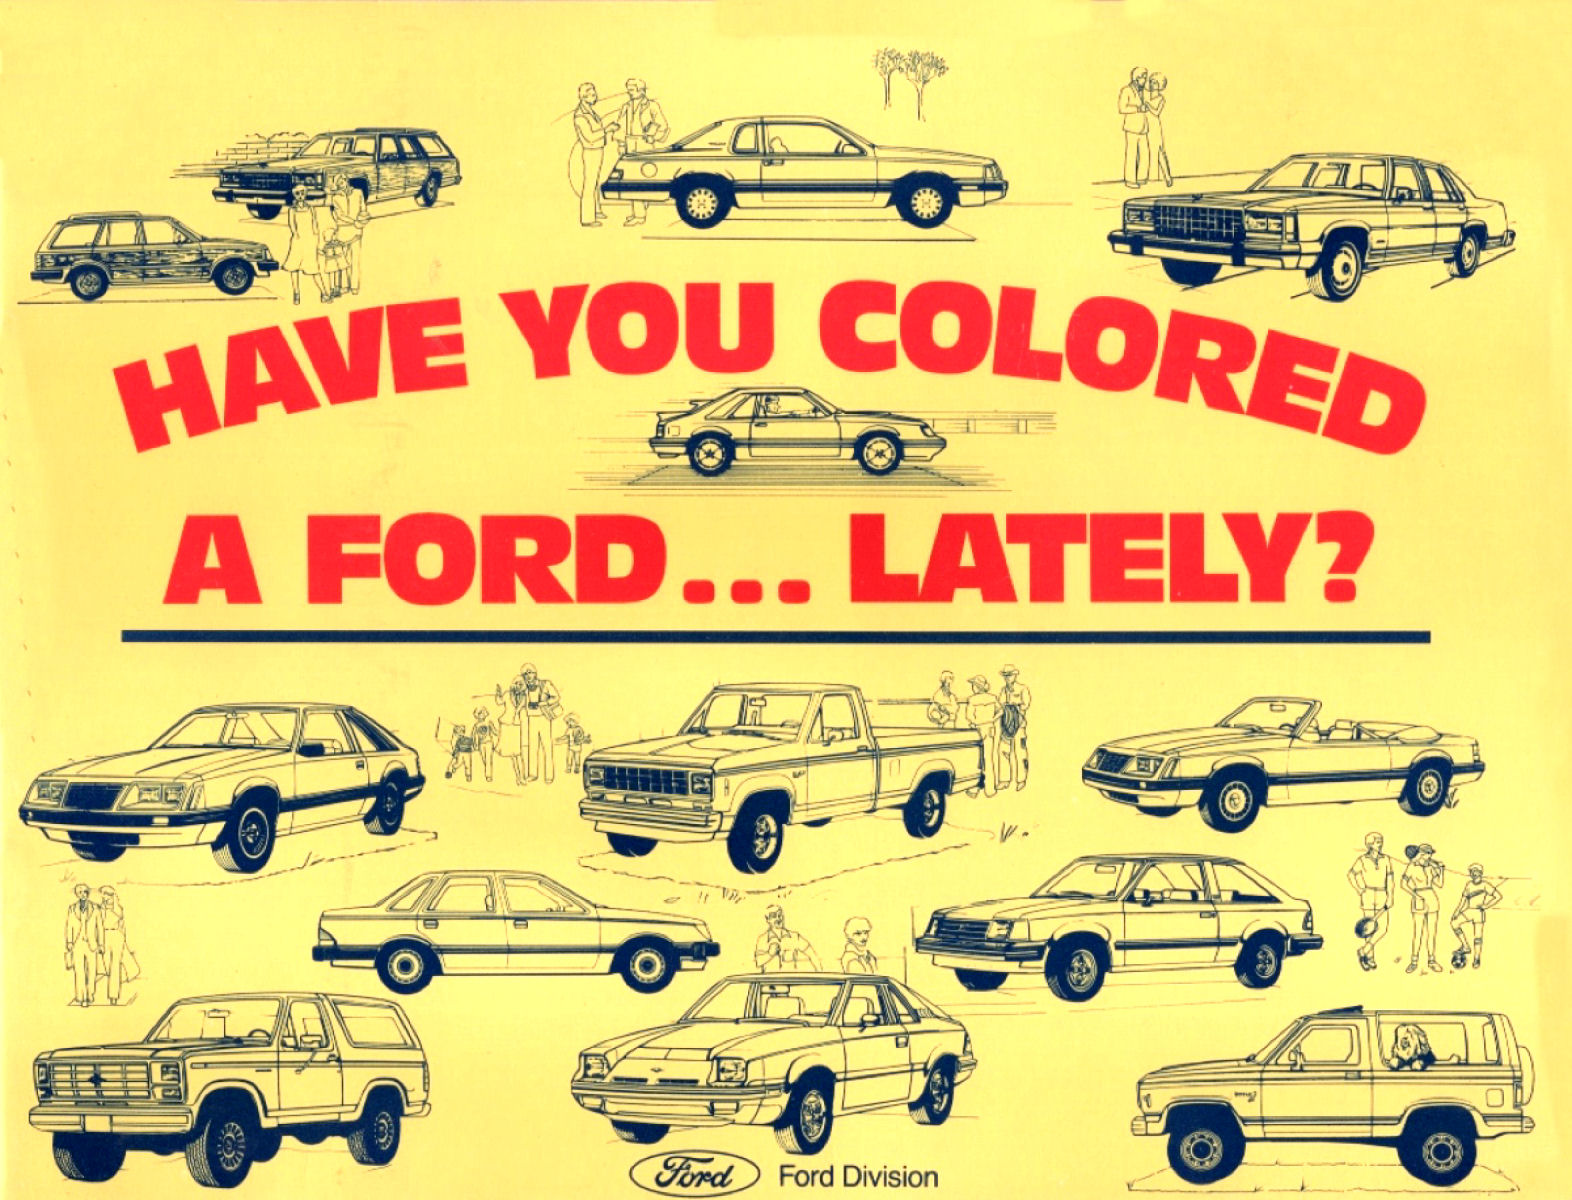 1984 Ford Coloring Book-01